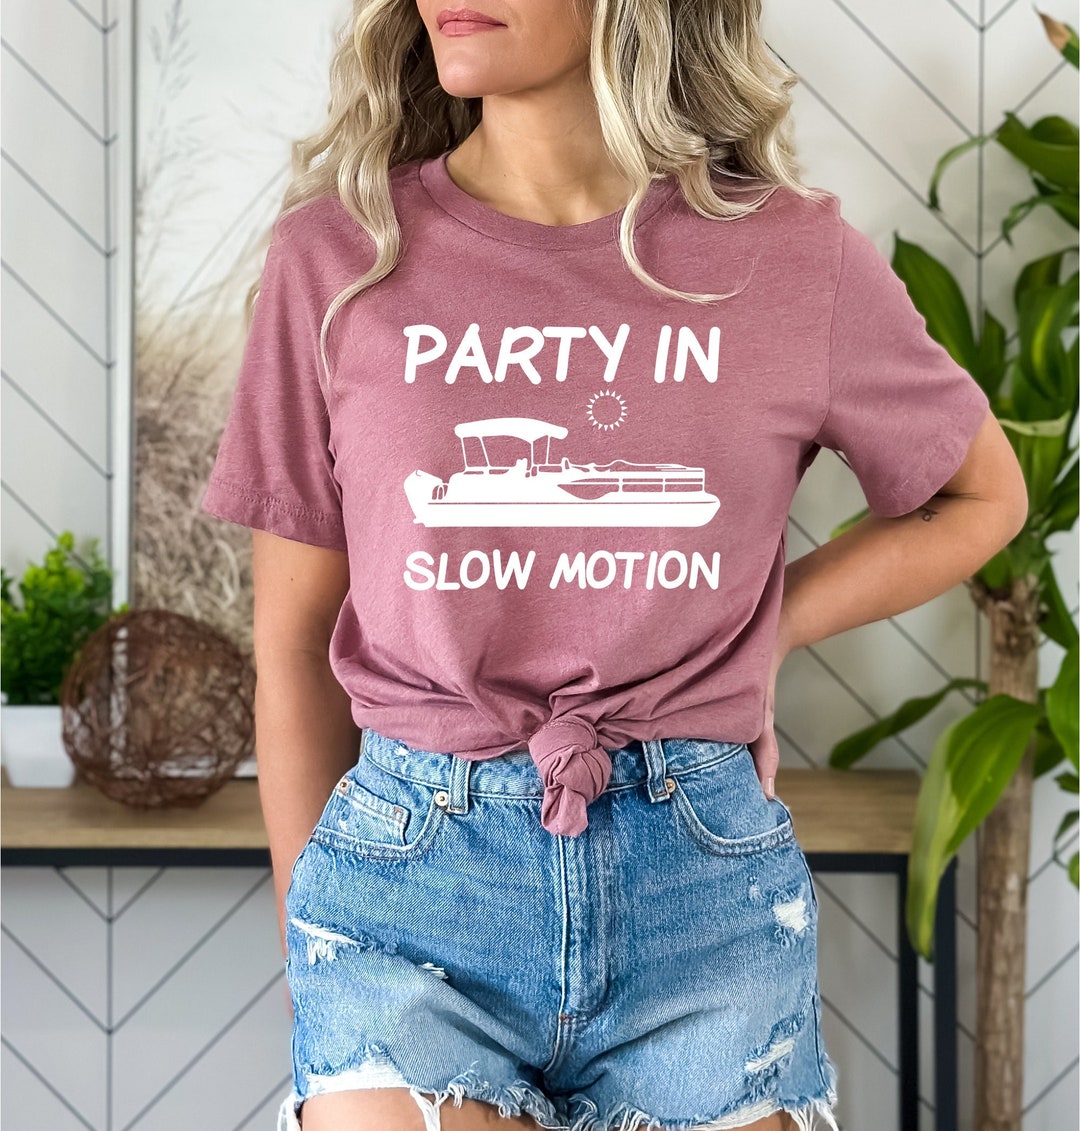 Party in Slow Motion Tshirt Cool Pontoon Boat Shirt Boat - Etsy